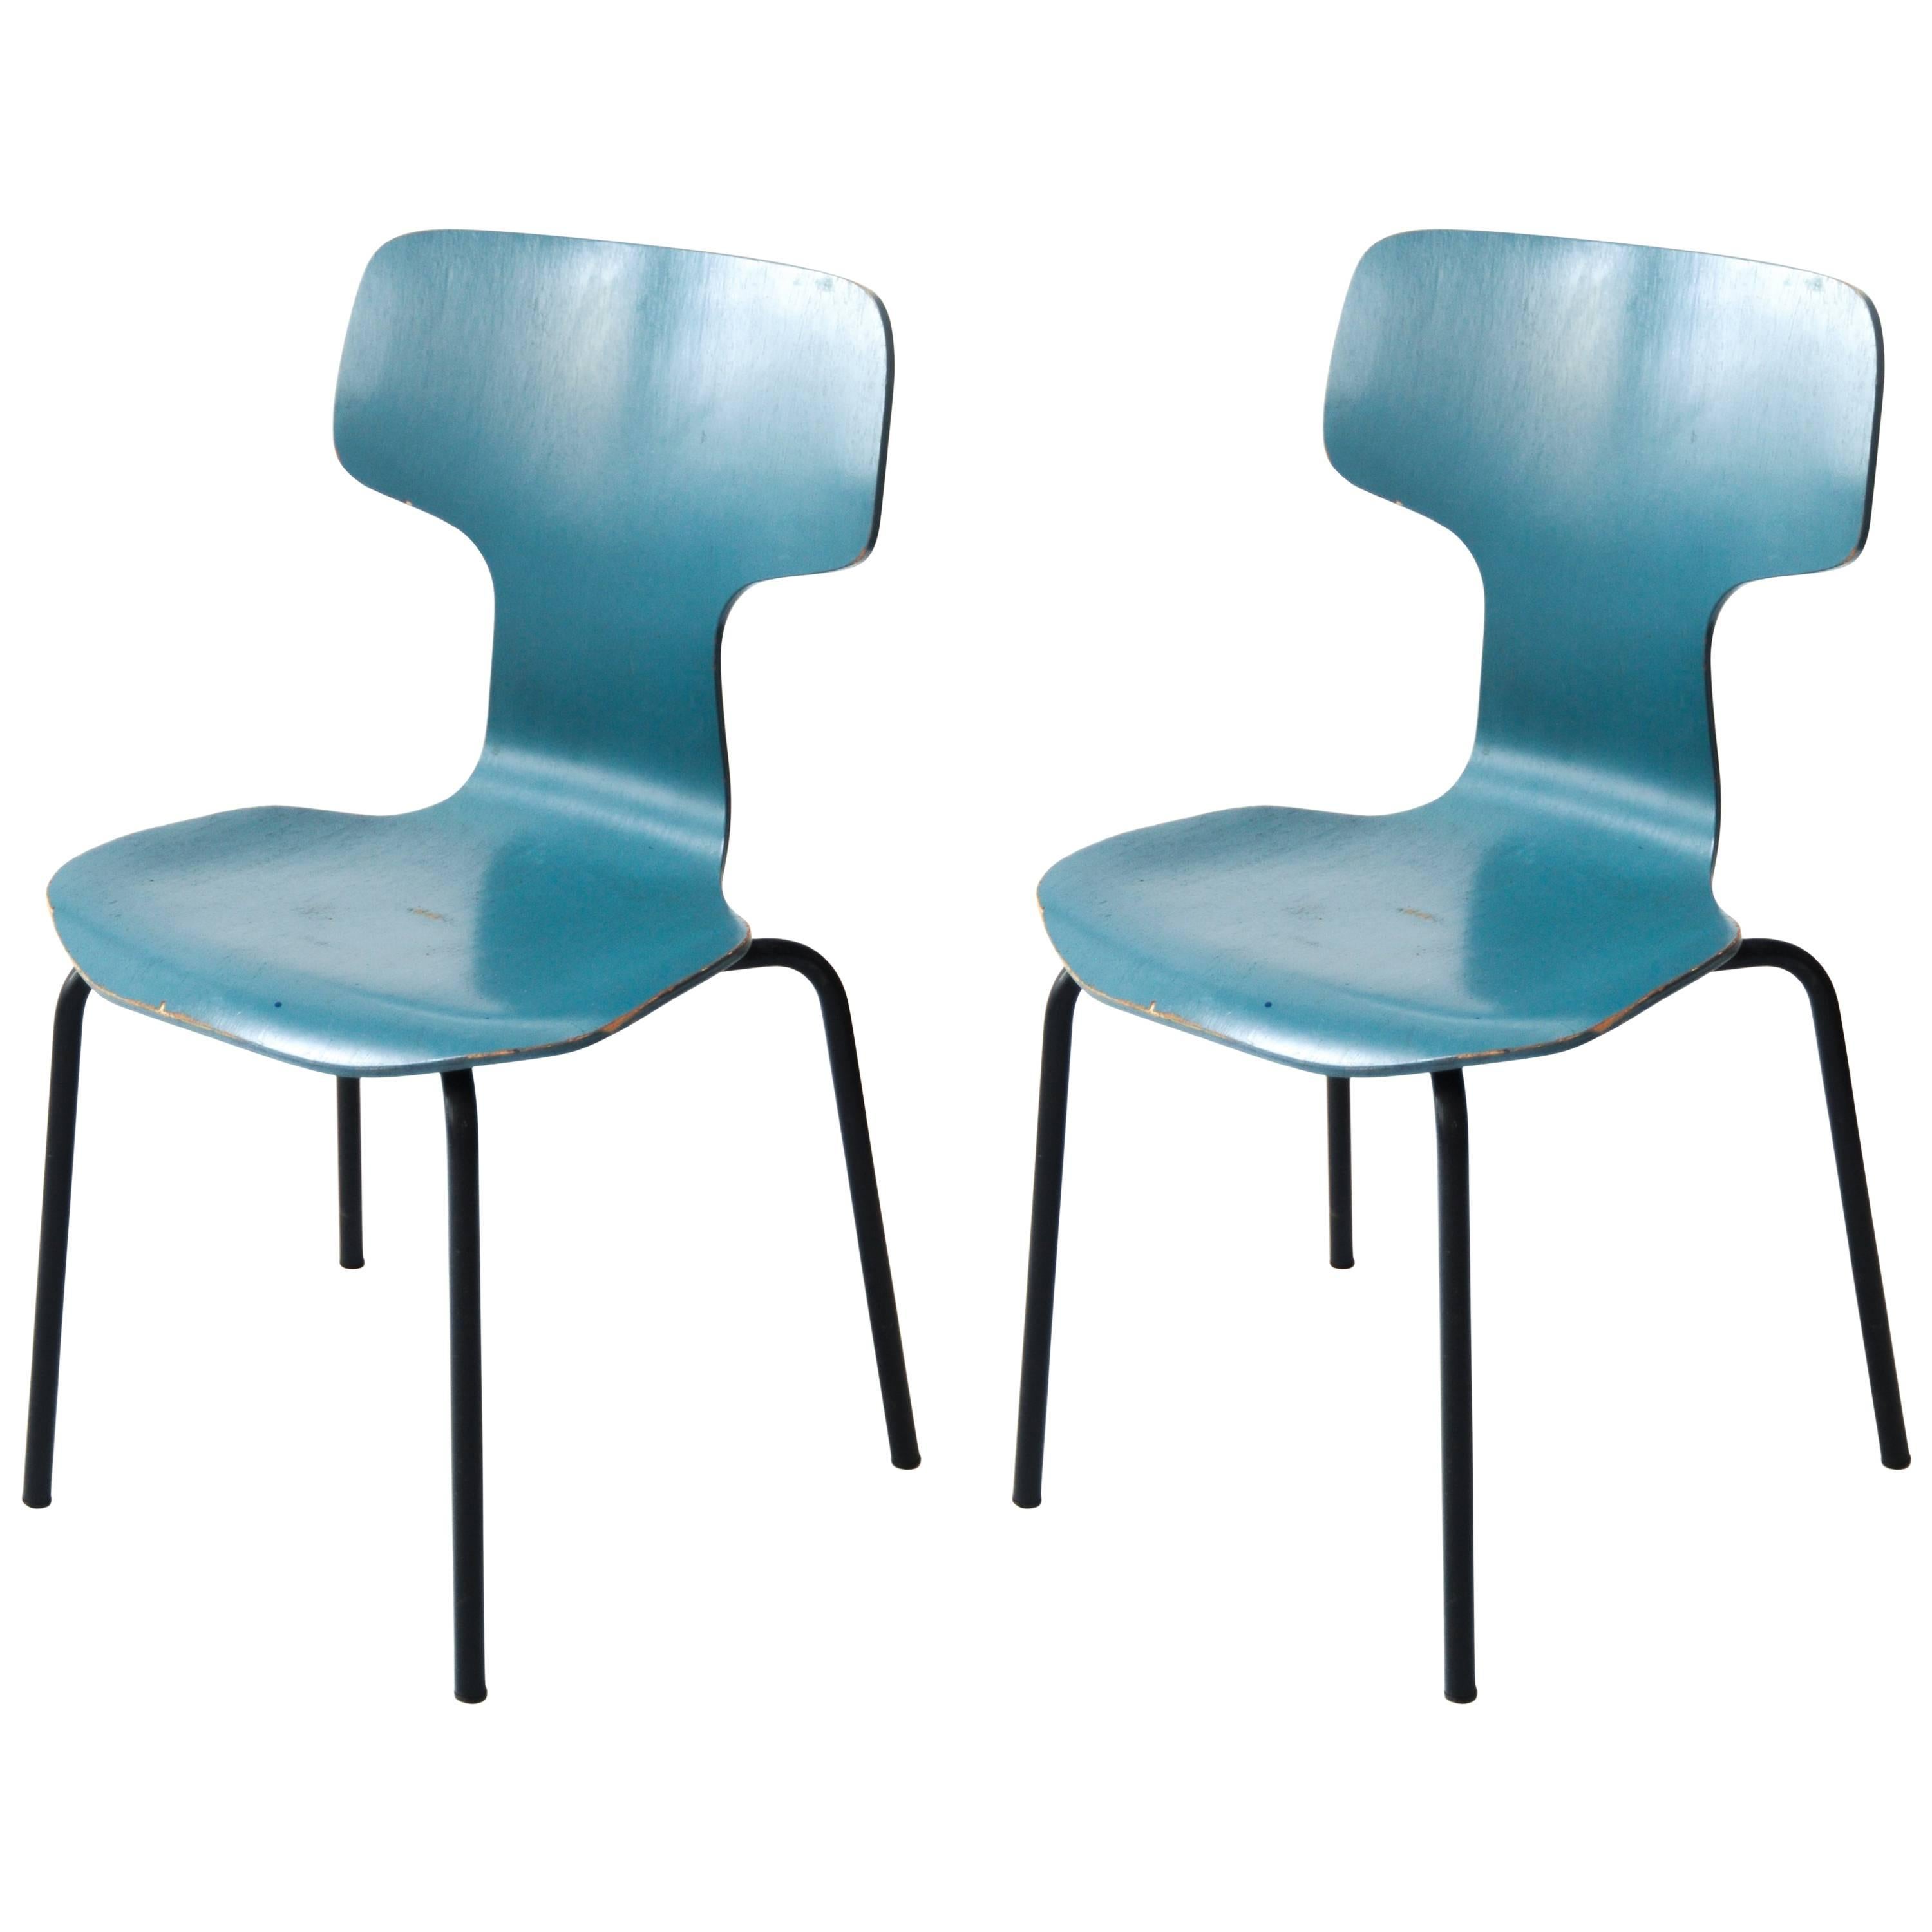 Pair of Model 3103 Chairs, Designed by Arne Jacobsen, Vintage, Denmark, 1955 For Sale